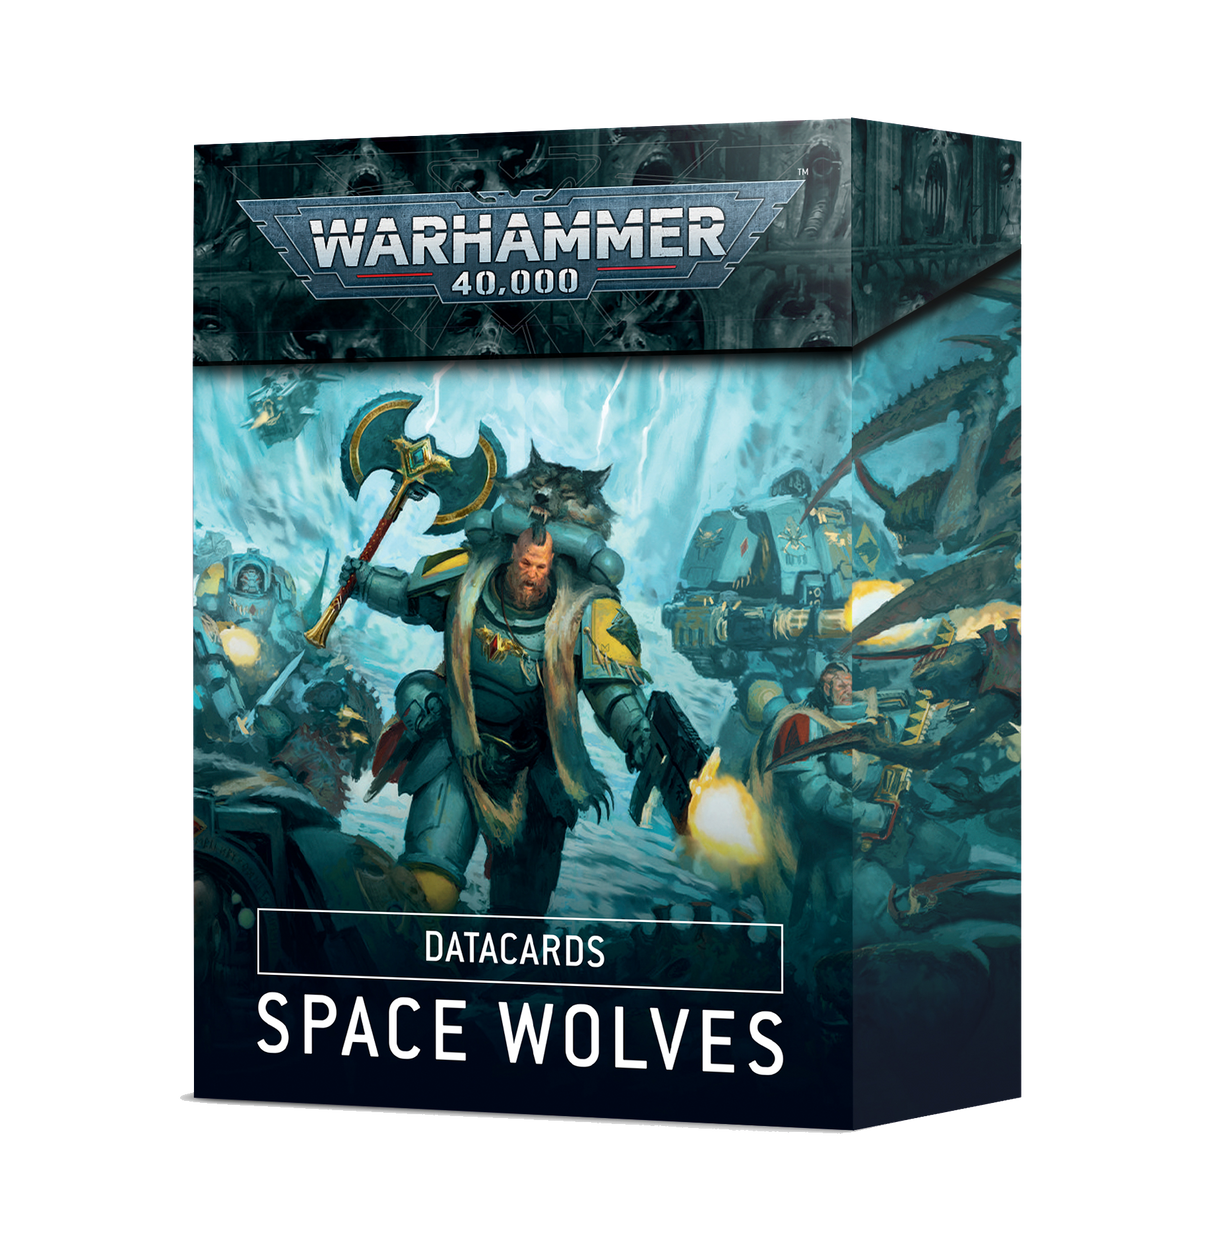 Warhammer 40,000: Space Wolves - Datacards